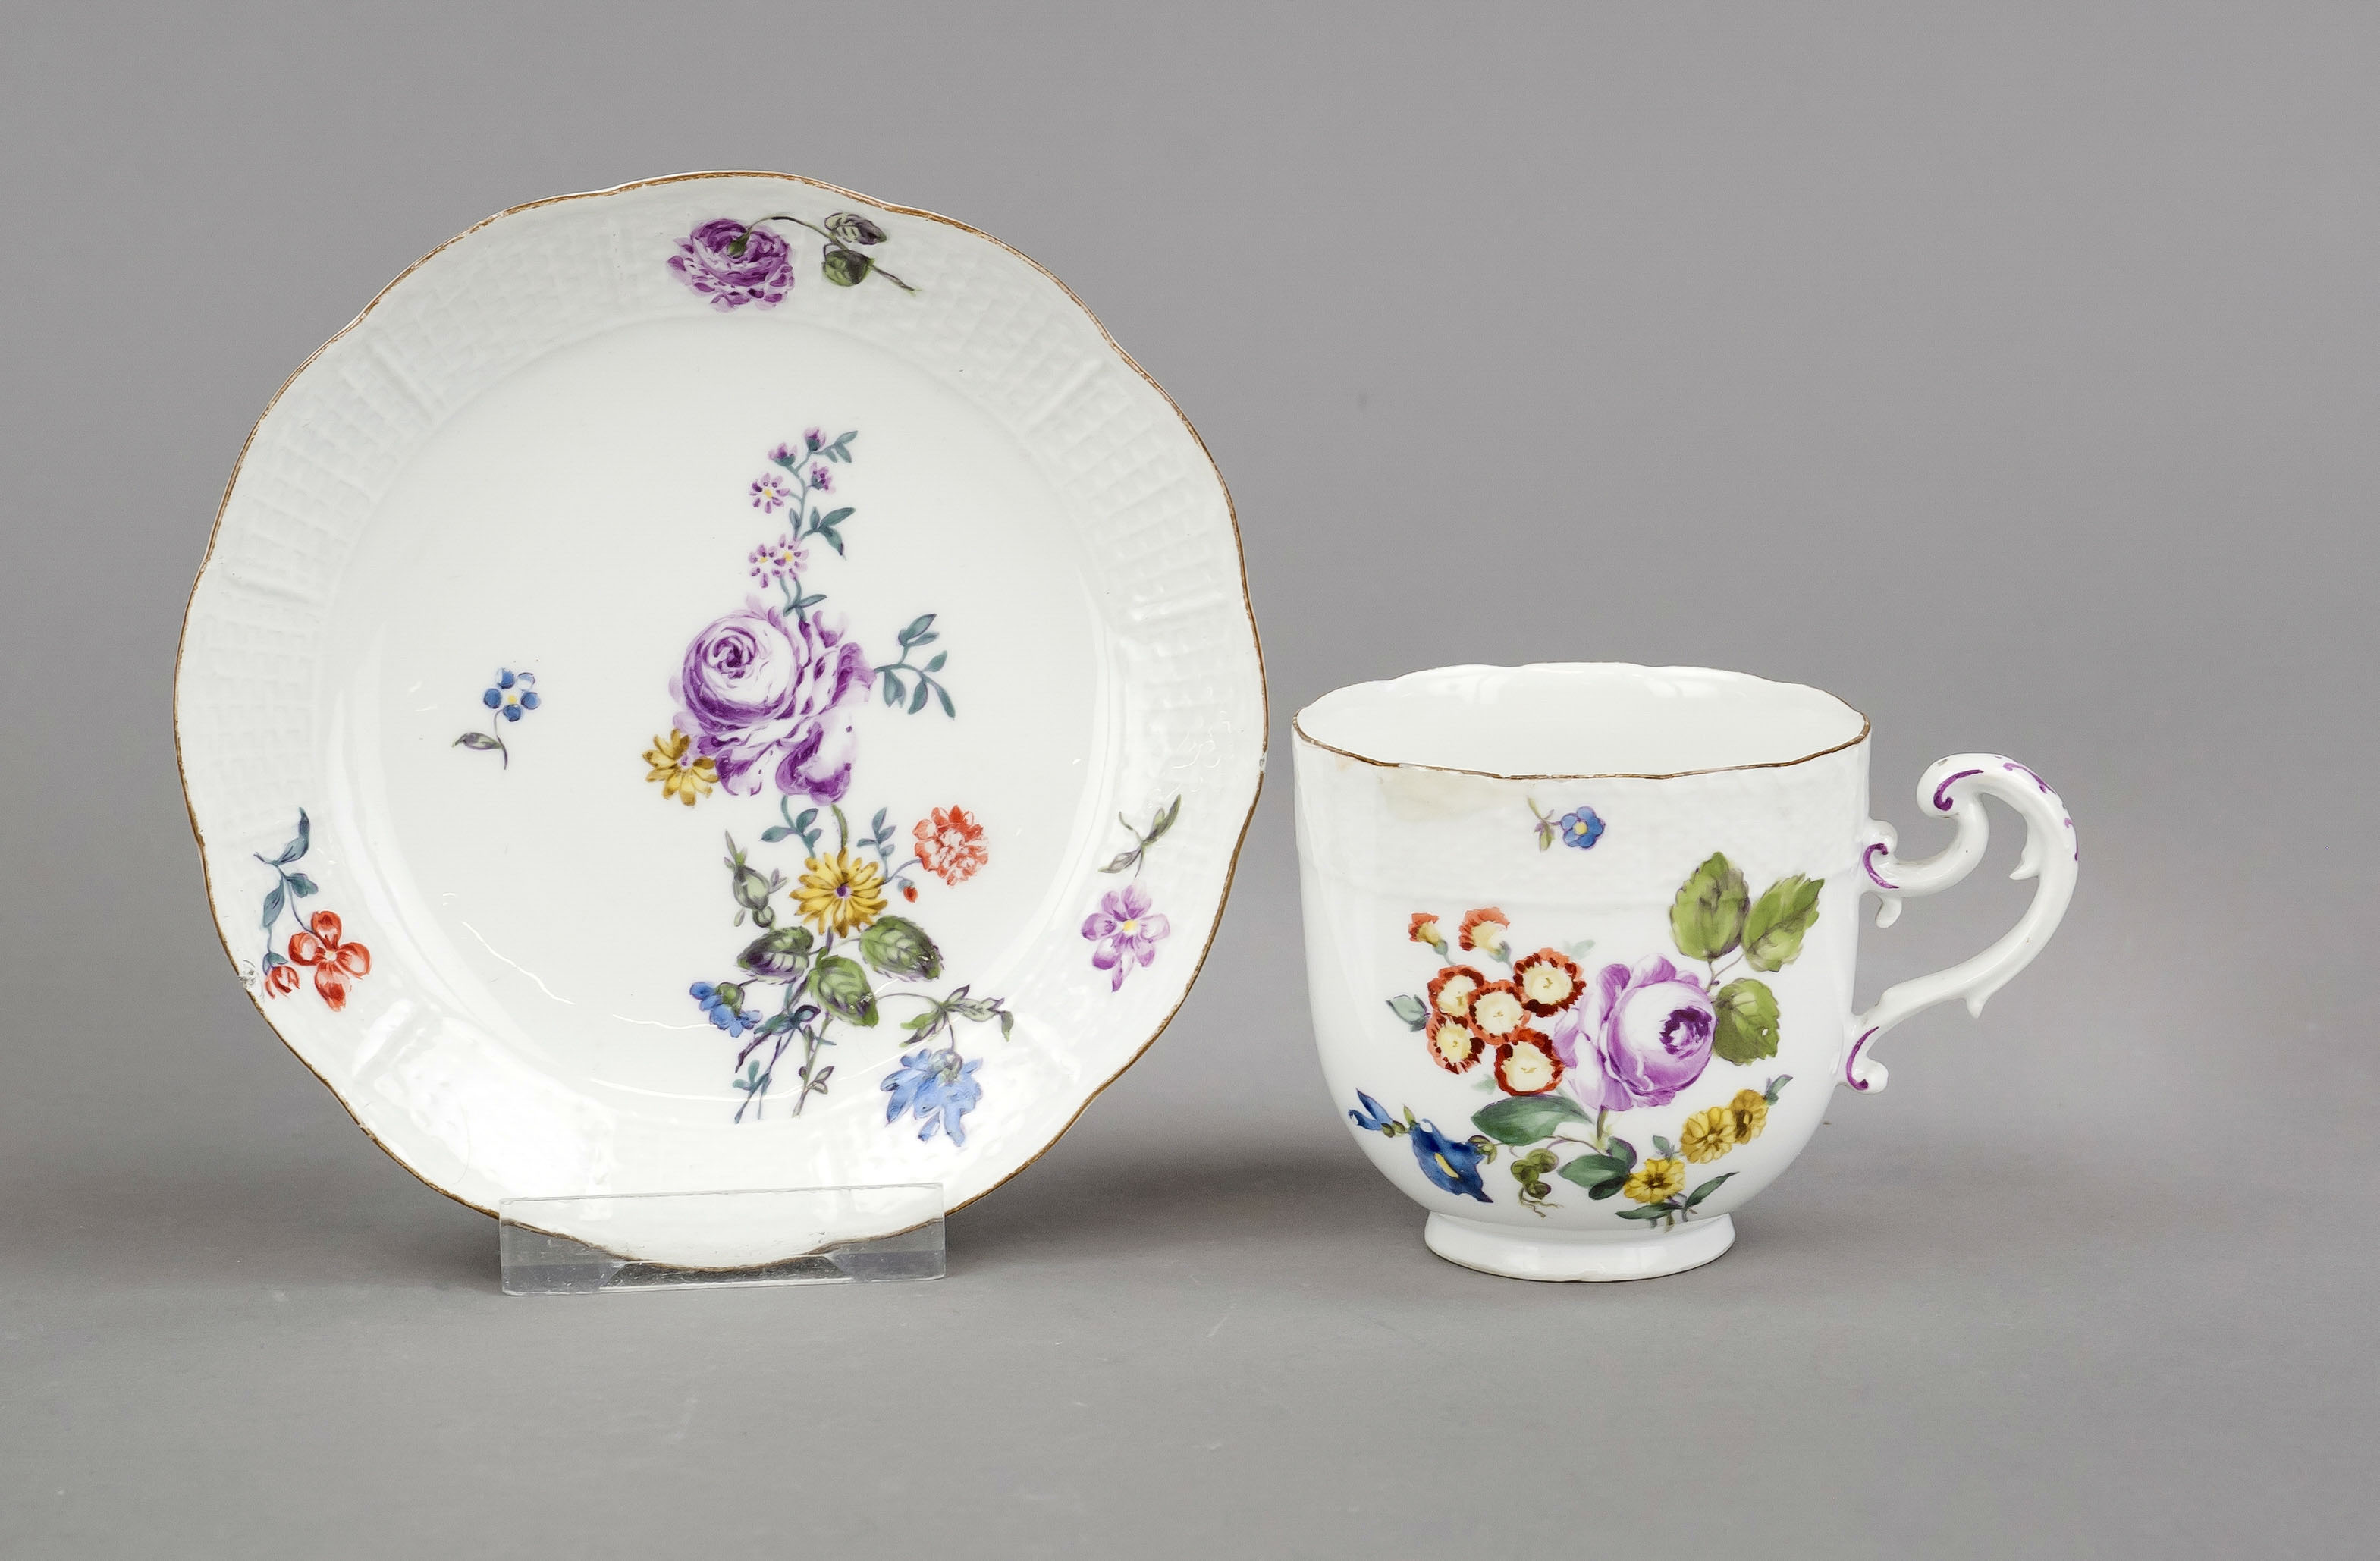 Cup and saucer, Meissen, 18th century, basket rim in relief, upturned volute handle, polychrome